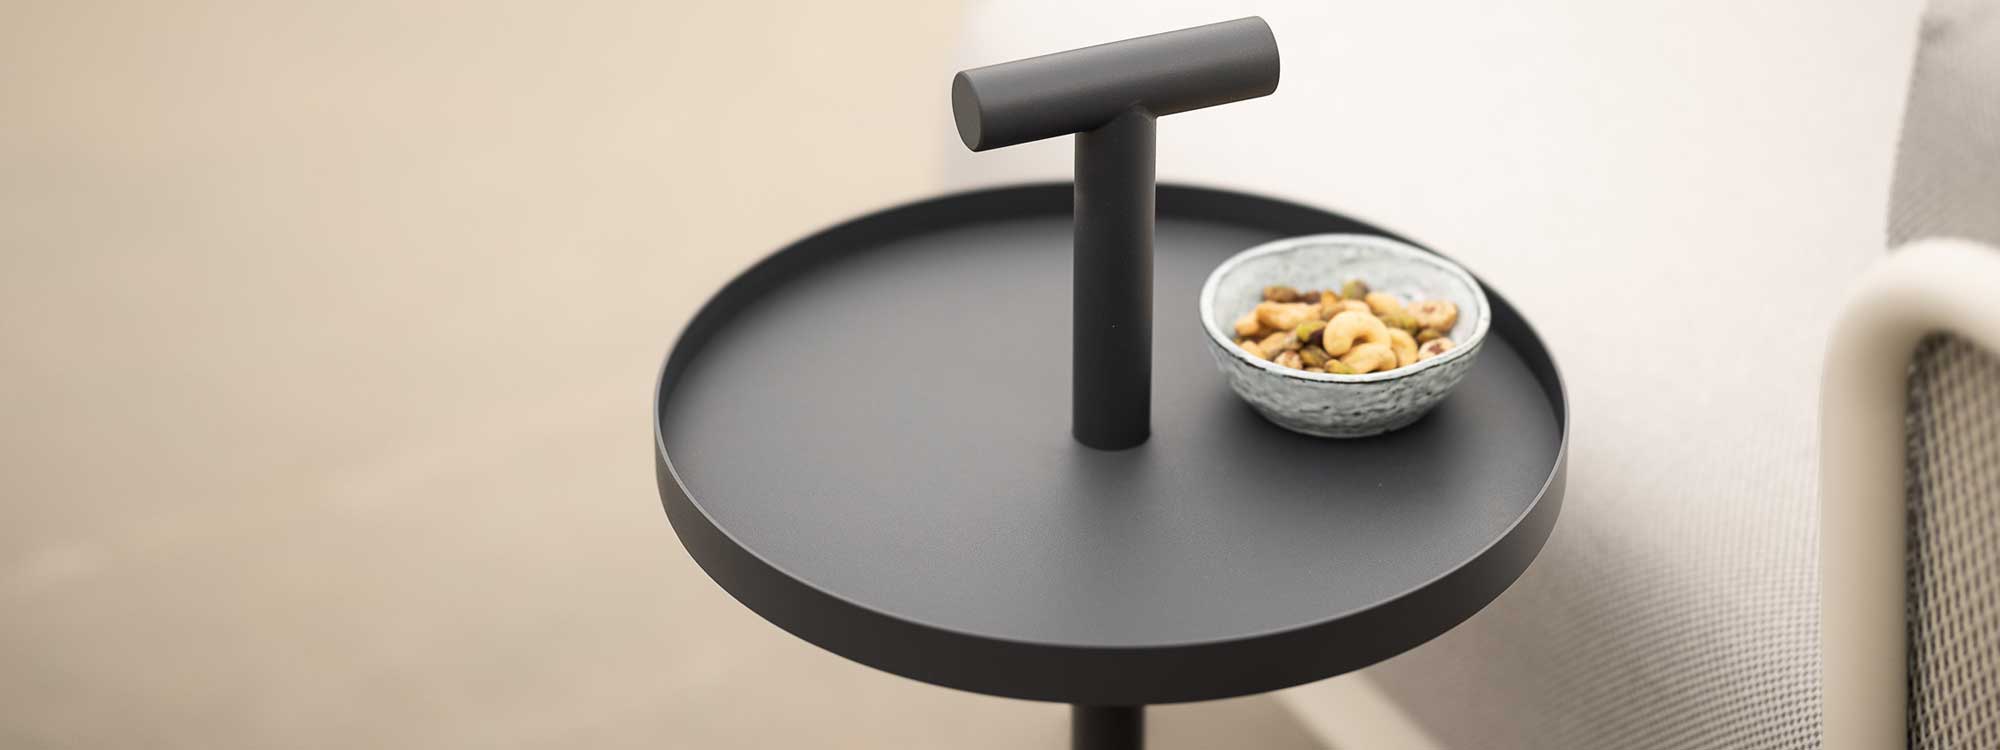 Image of Albus modern garden side table with handle, shown in anthracite finish